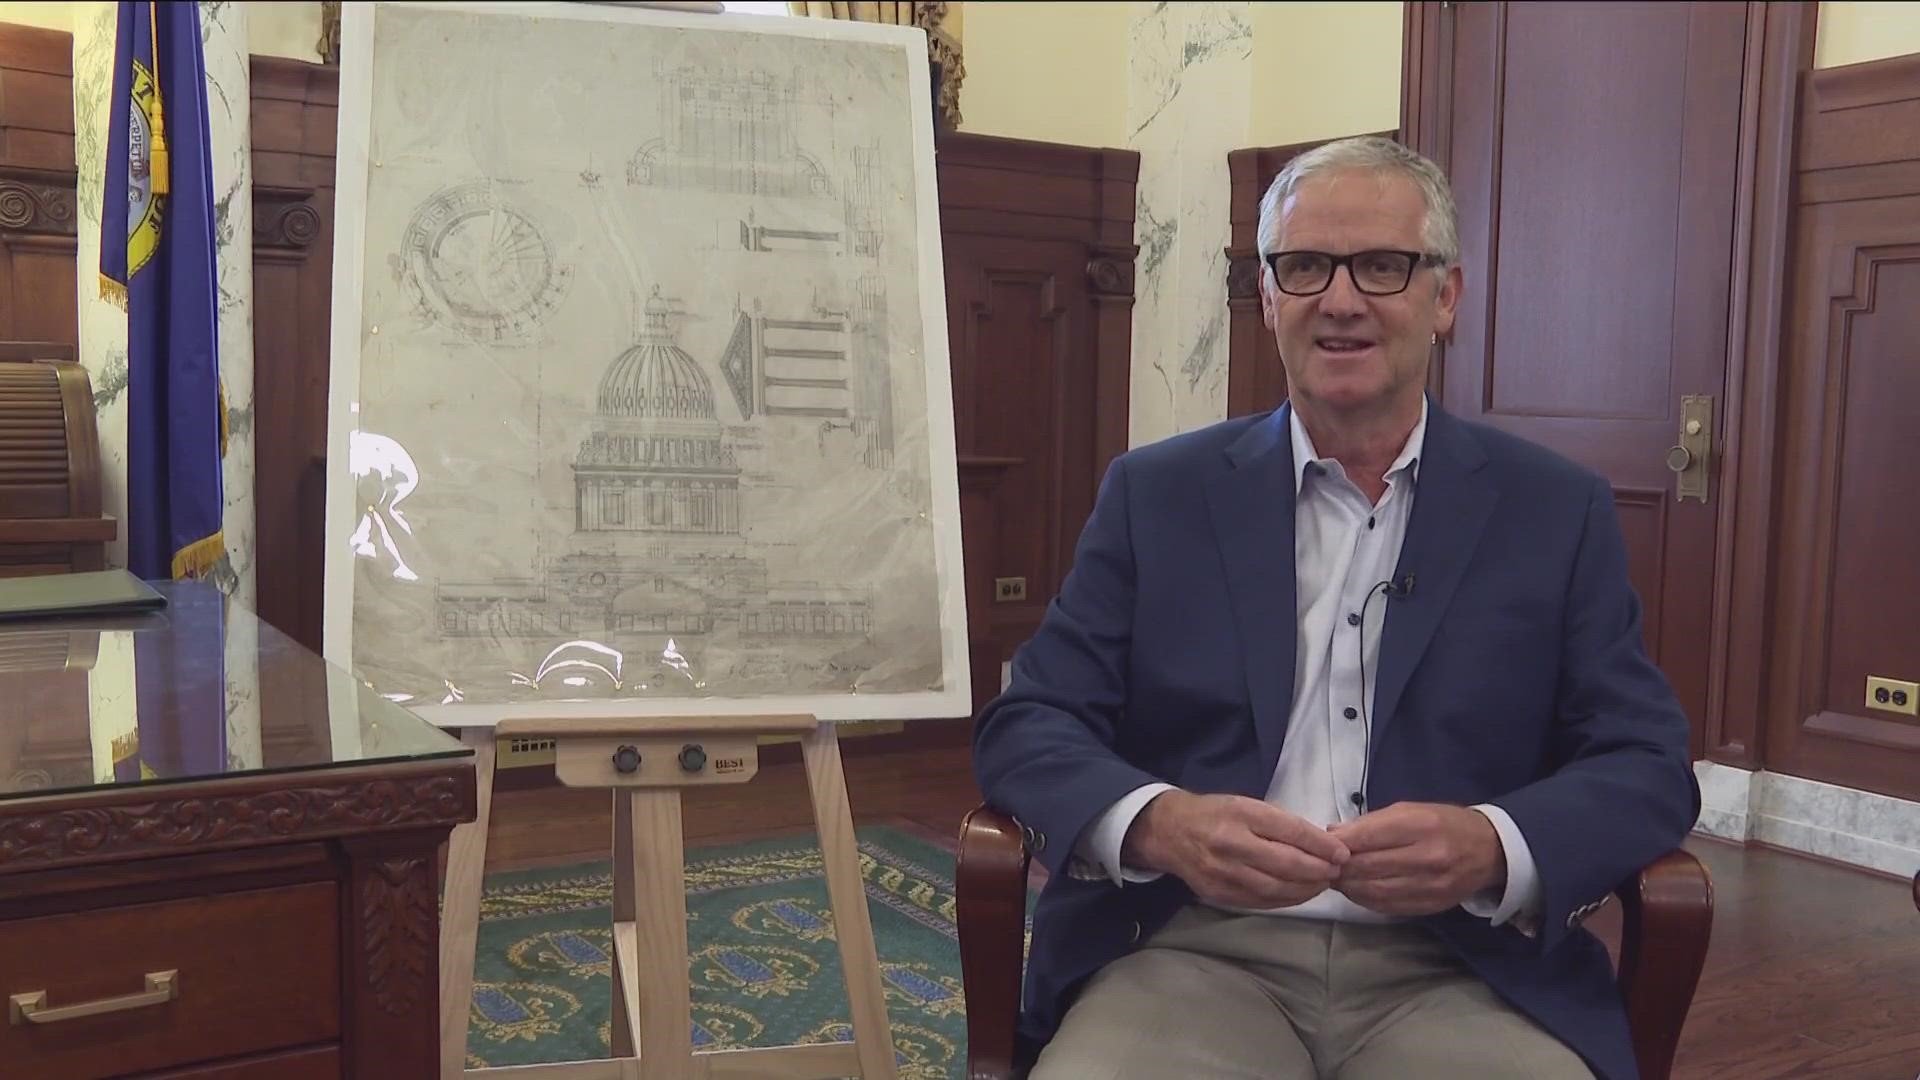 The people over at Hummel Architects are donating all their original drawings of the Idaho State Capitol building directly to the "Idaho State Historical Society."